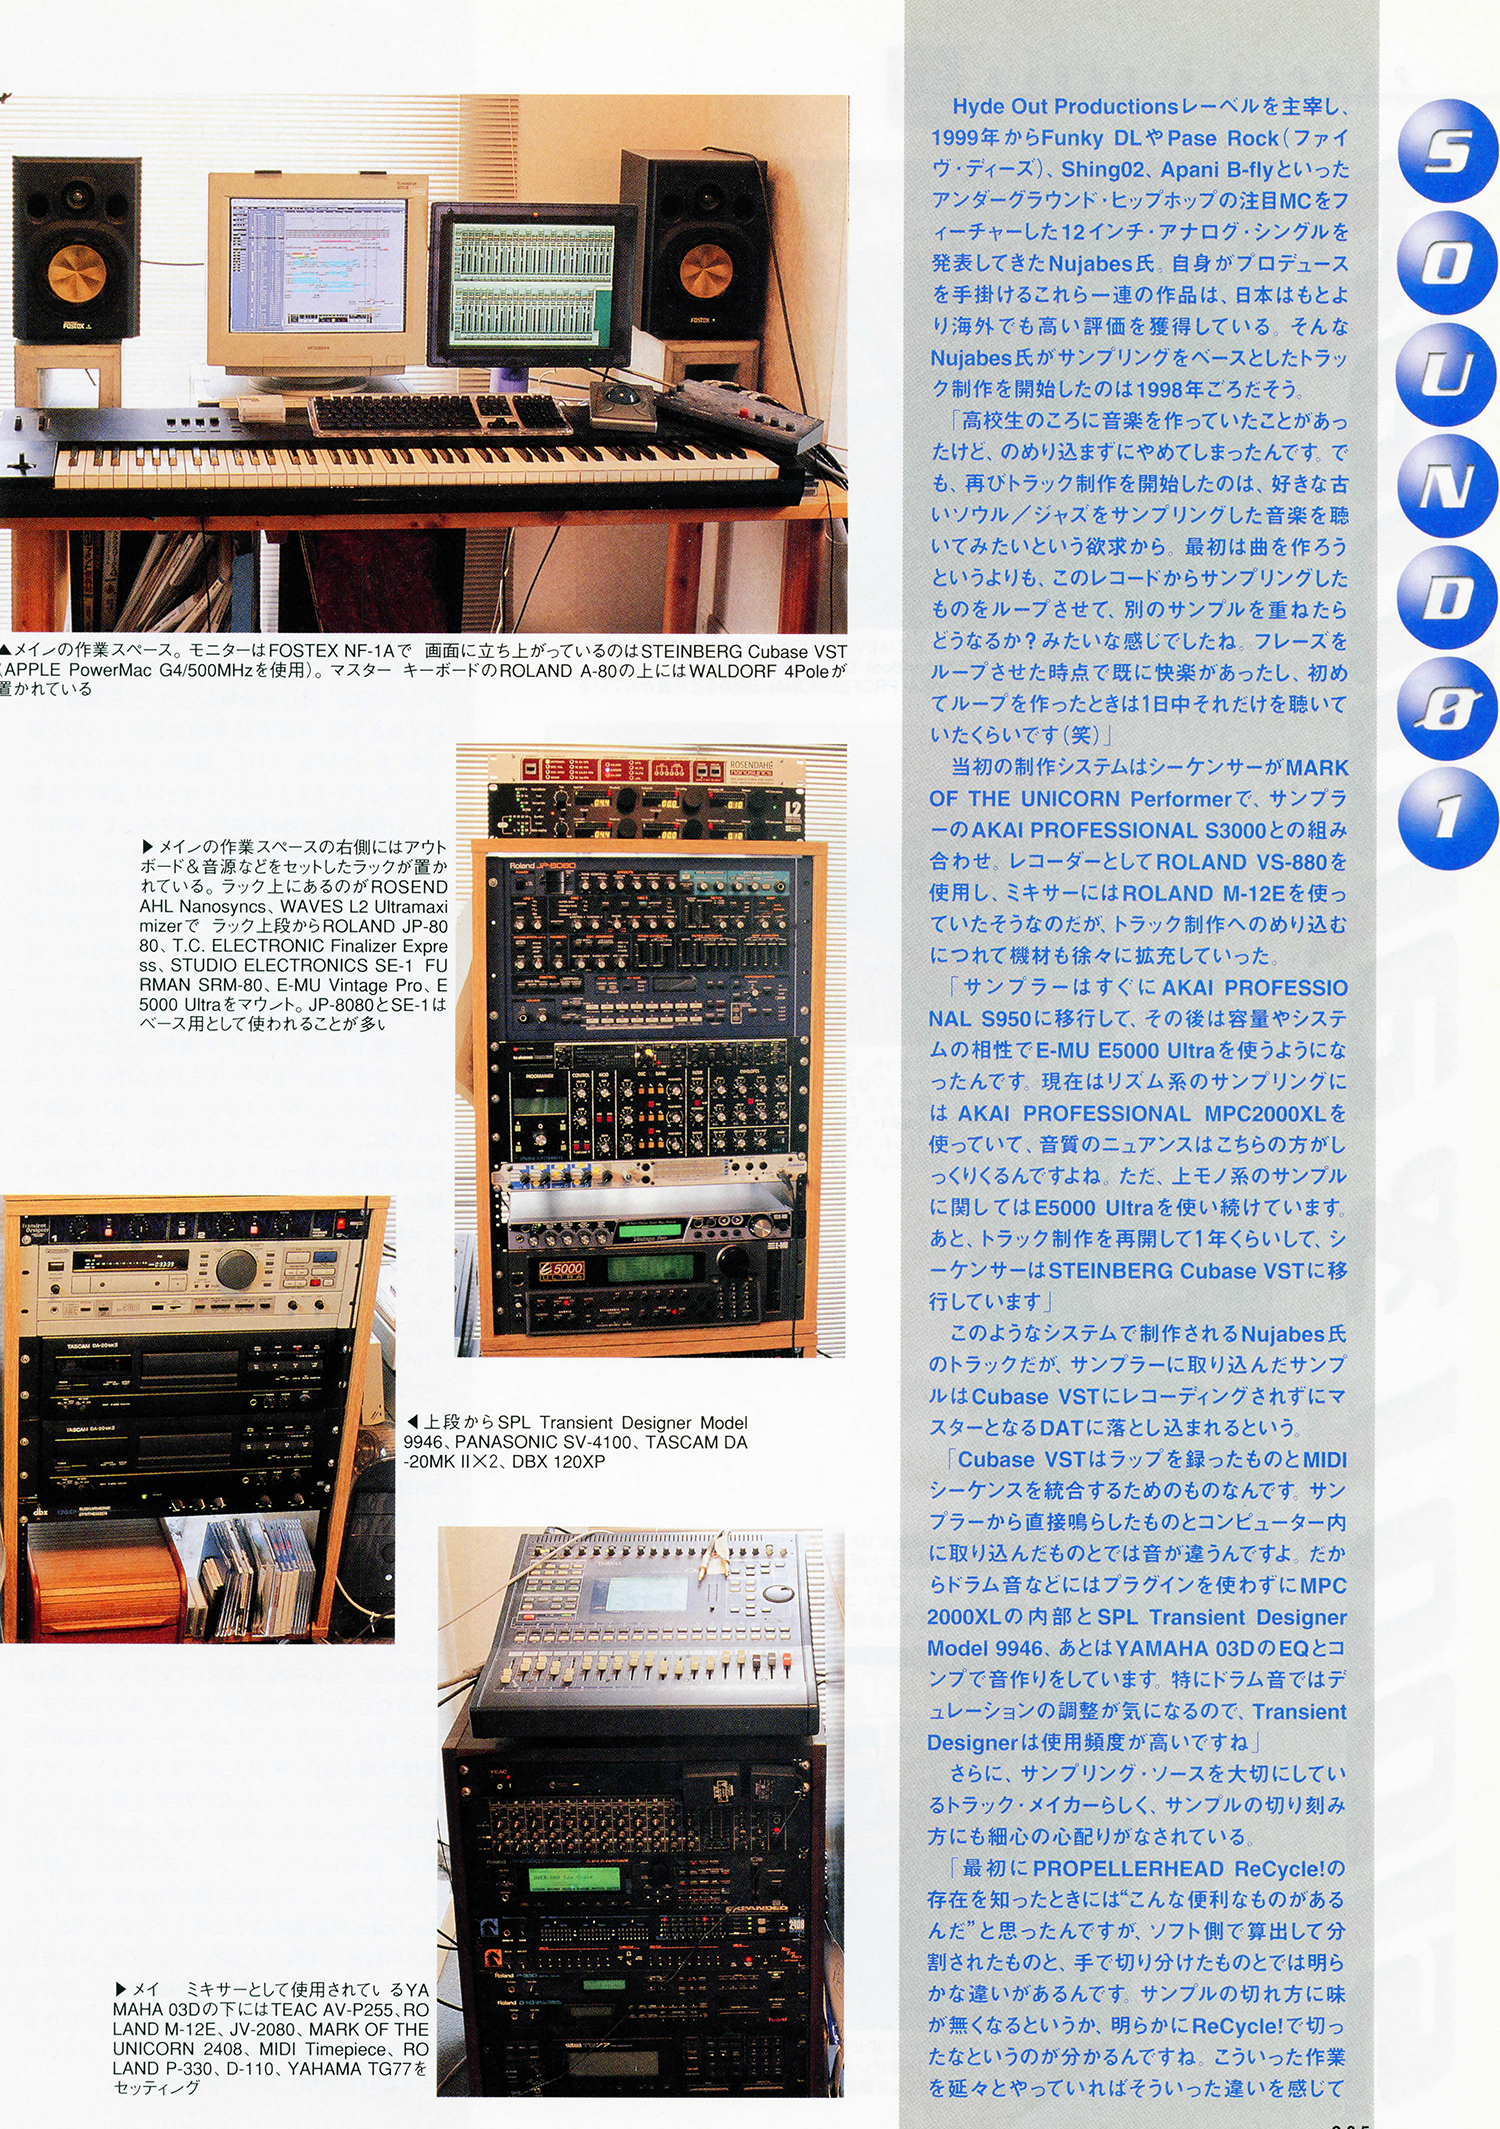  Pages from a Japanese hip-hop and audio engineering magazine showing Nujabes’ studio in which he made Metaphorical Music as well as the Samurai Champloo OST. 2003-2004. Scans by Josue Silva. 